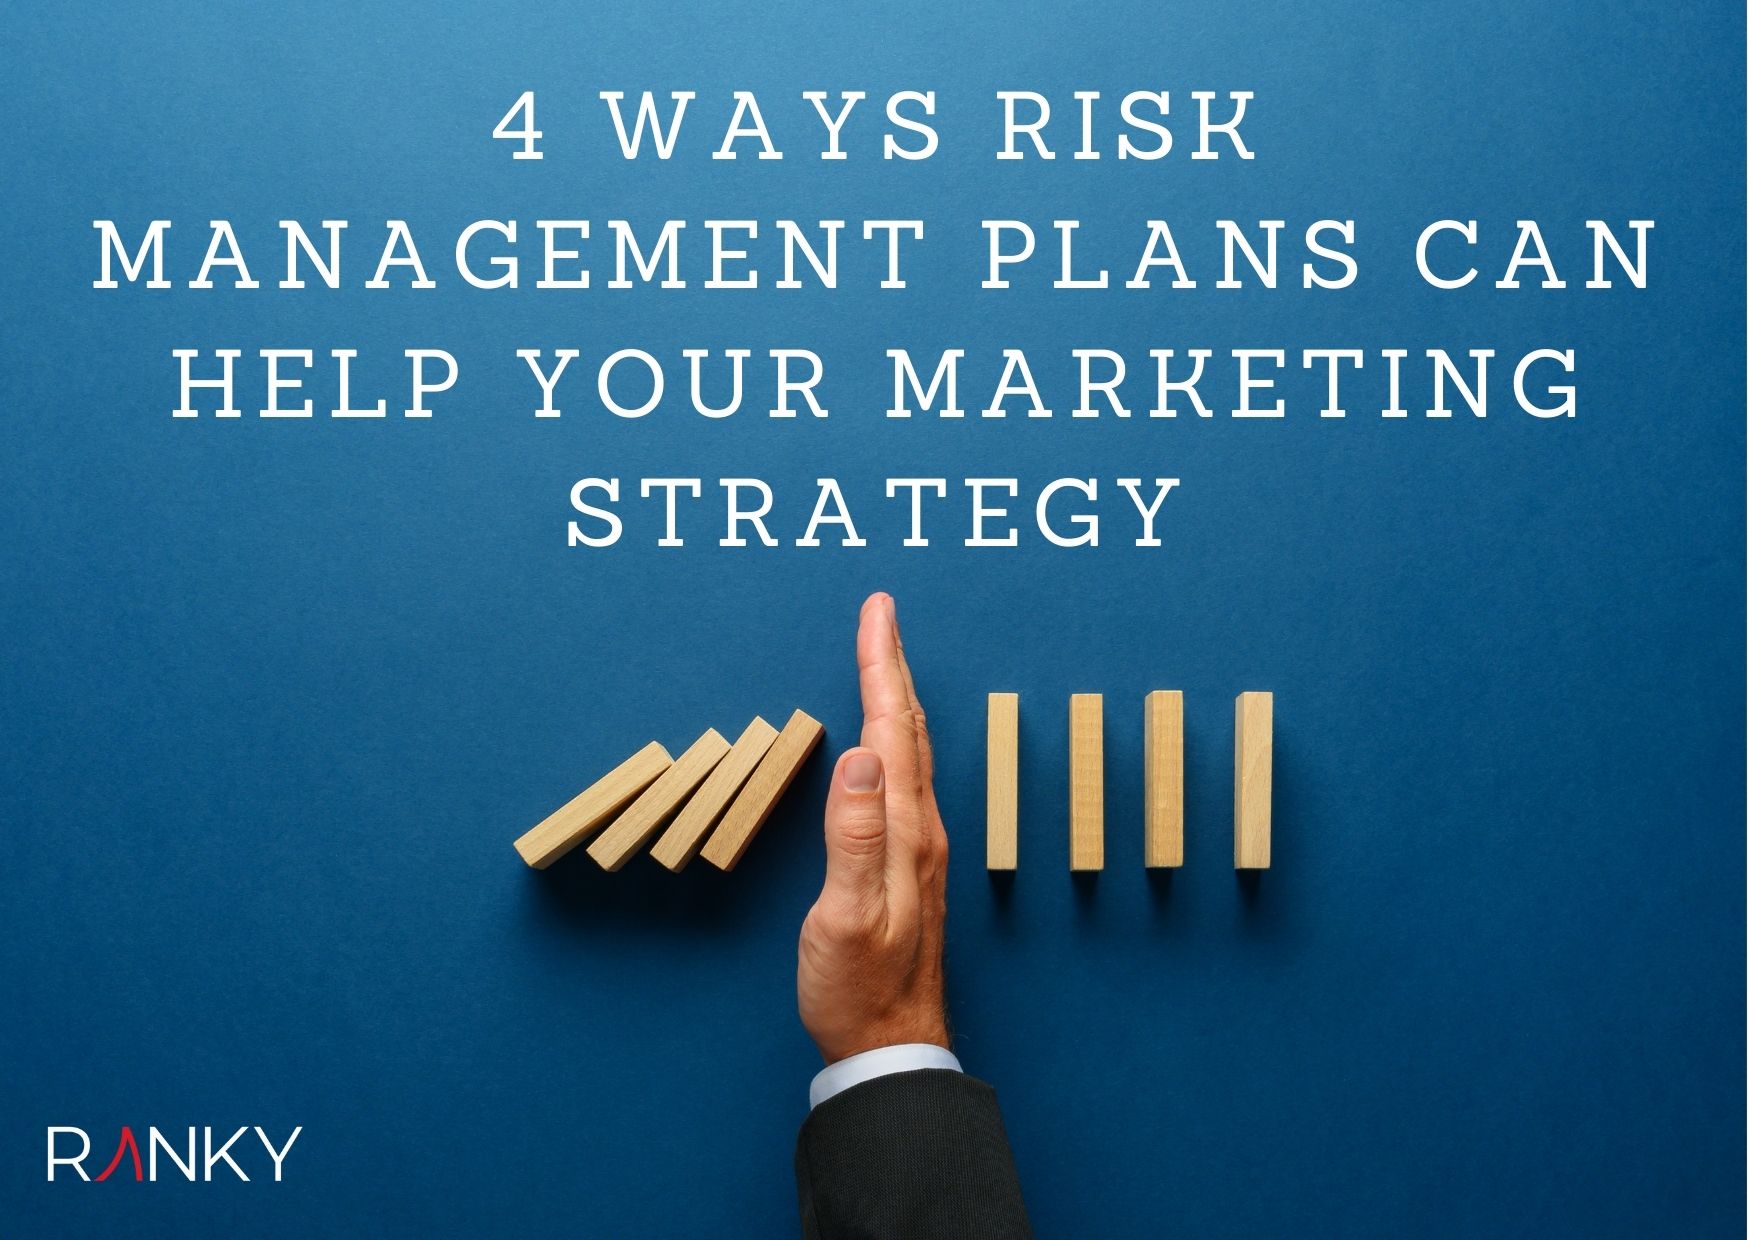 4 Ways Risk Management Plans Can Help Your Marketing Strategy